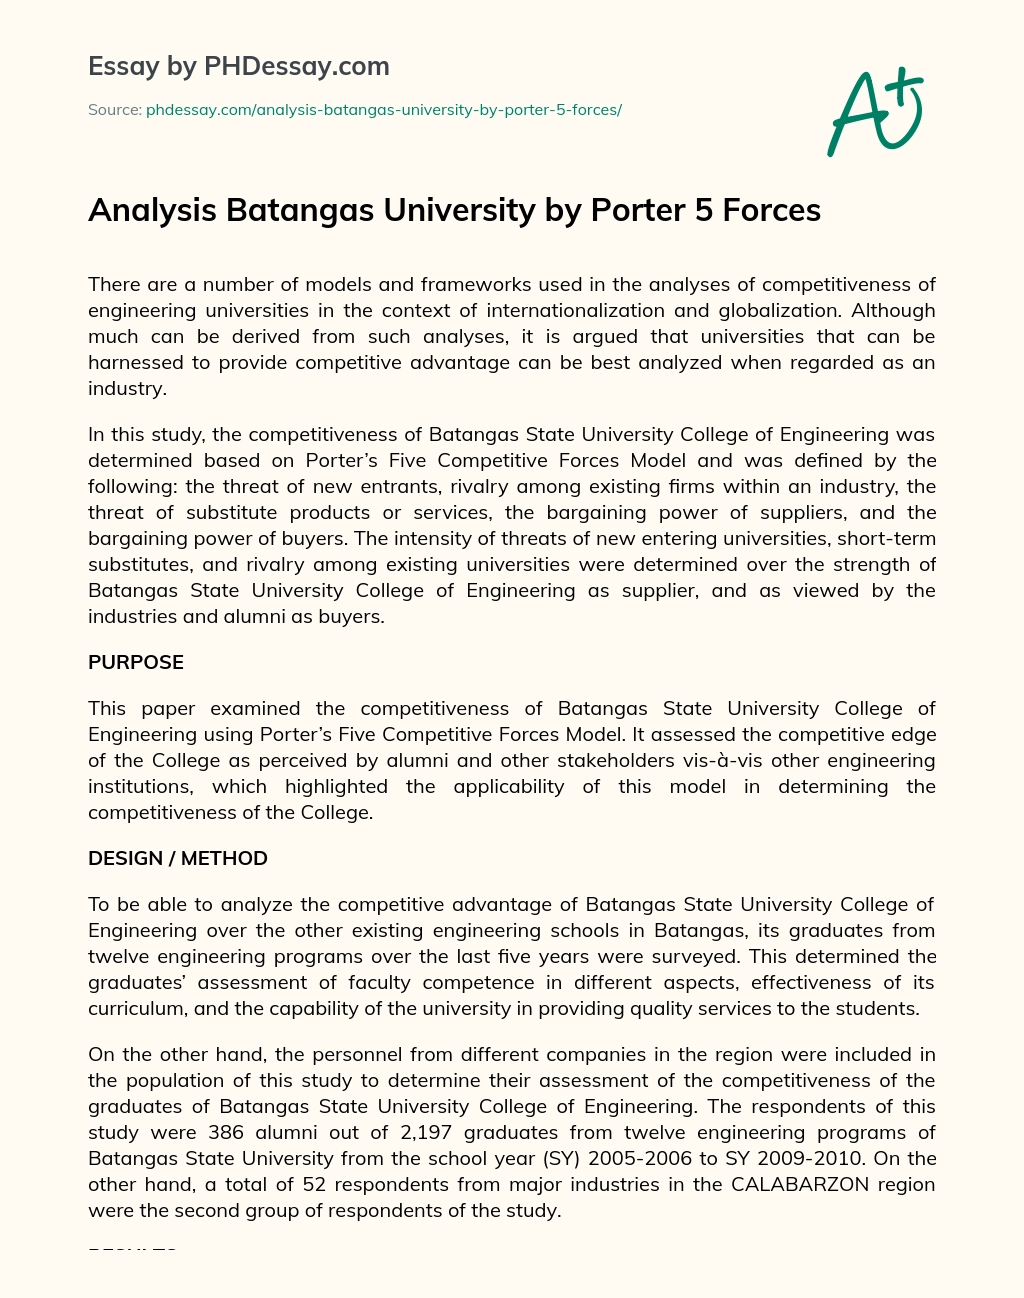 Analysis Batangas University by Porter 5 Forces essay